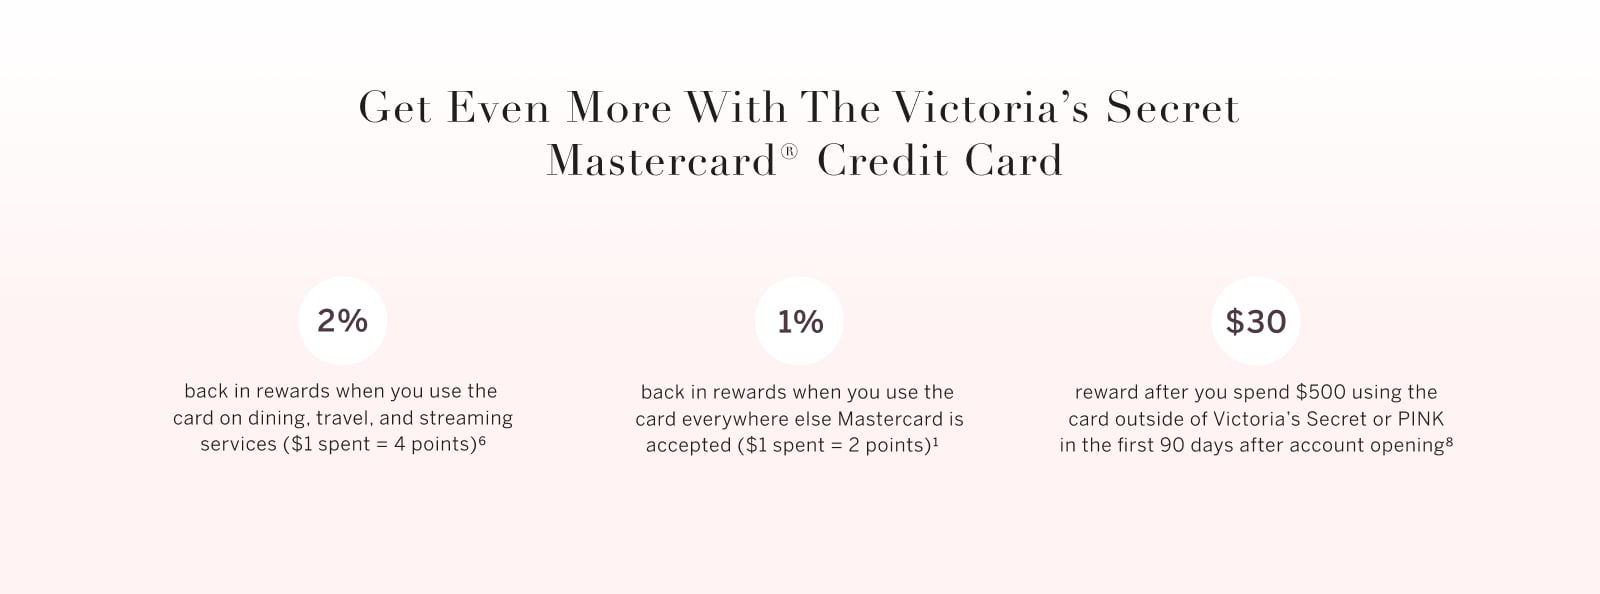 Get Even More with the Victorias Secret Mastercard Credit Card. 2% back in rewards when you use the card on dining, travel, and streaming services ($1 spent = 4 points). 1% back in rewards when you use the card everywhere else Mastercard is accepted ($1 spent = 2 points). $30 reward after you spend $500 using the card outside of Victorias Secret or PINK in the first 90 days after account opening.